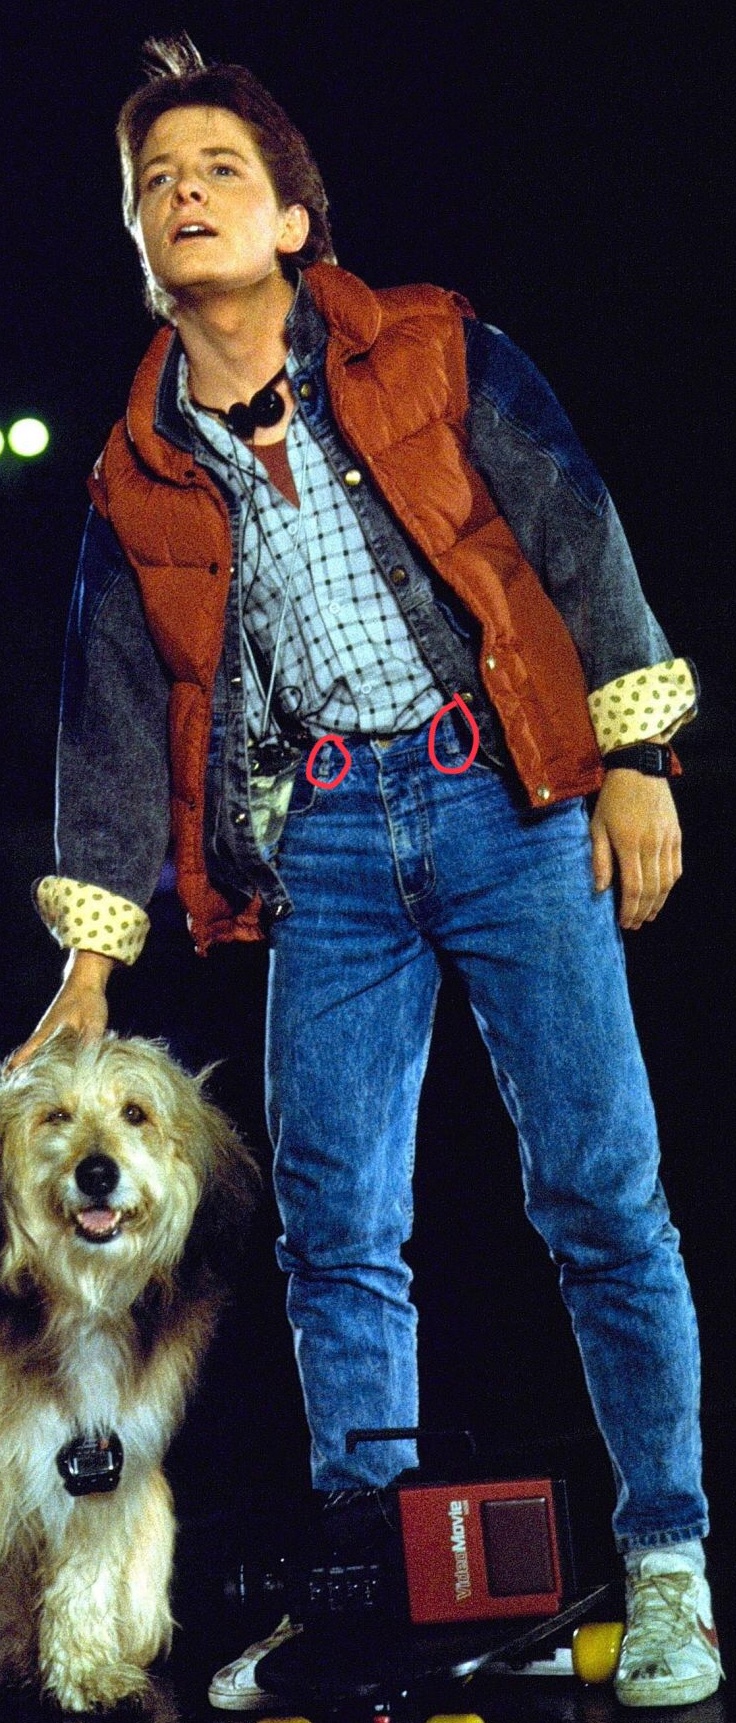 Marty McFly's Jeans...Let's Talk | RPF Costume and Prop Maker Community